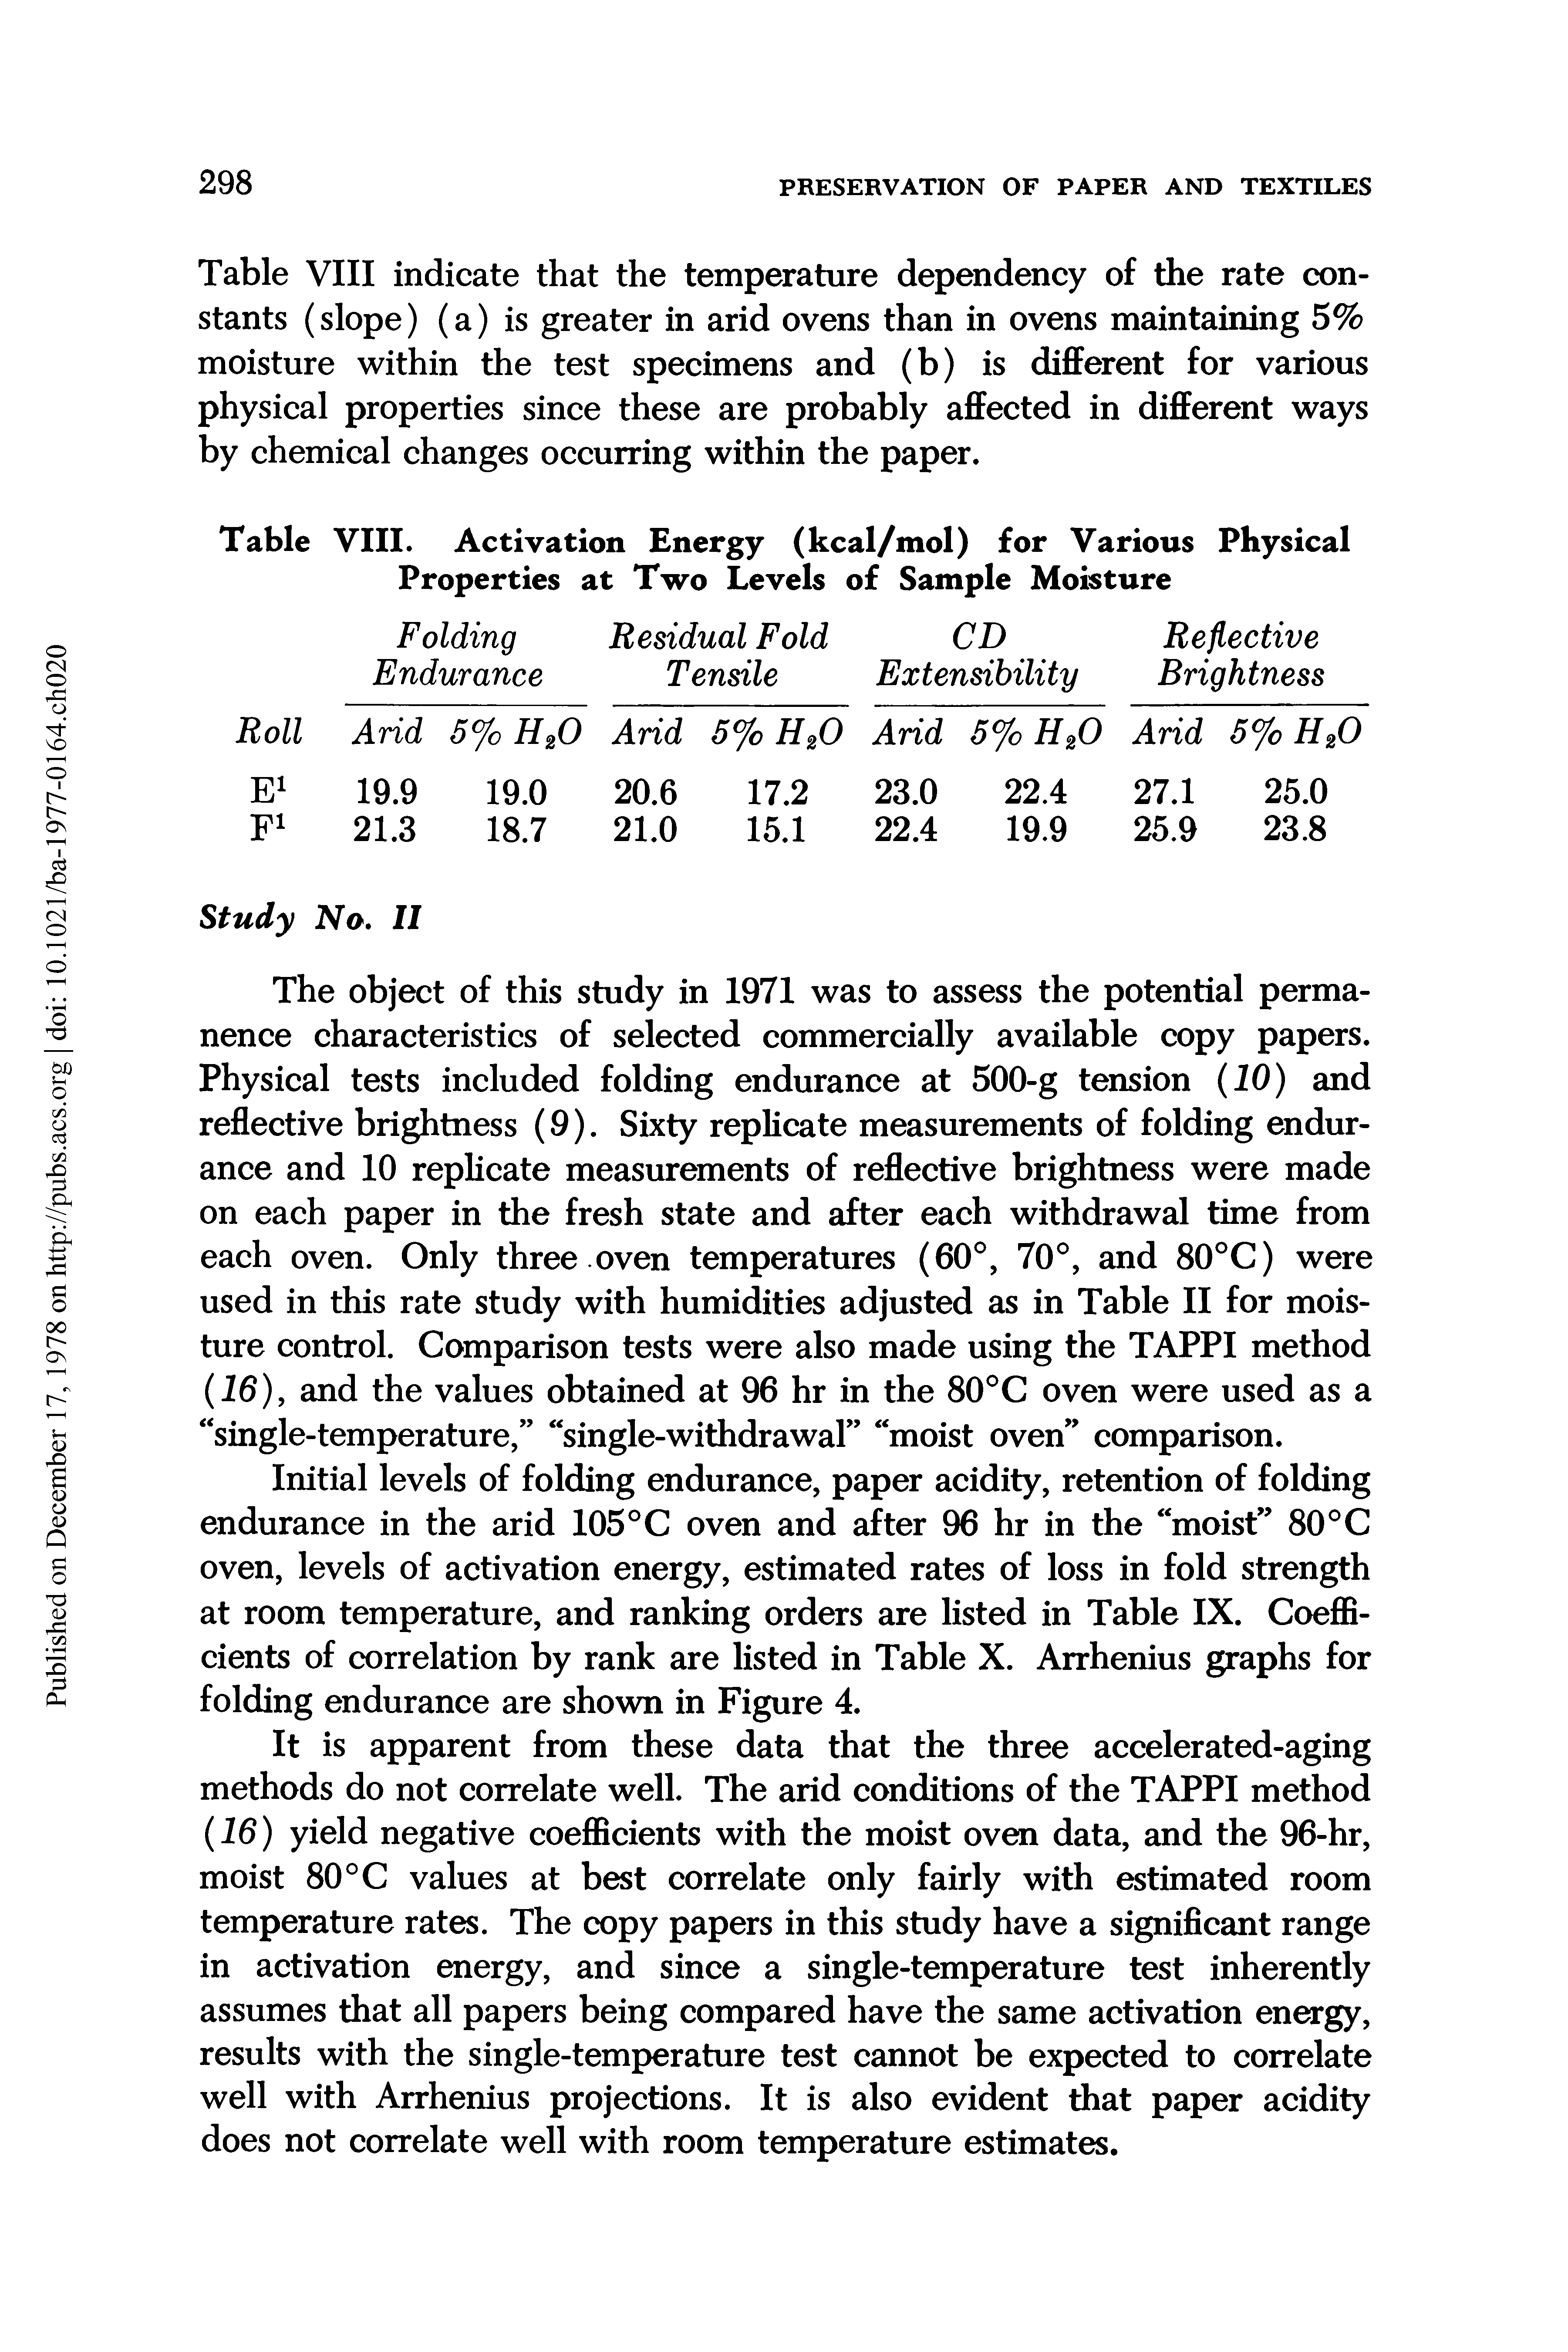 Table VIII indicate that the temperature dependency of the rate constants (slope) (a) is greater in arid ovens than in ovens maintaining 5% moisture within the test specimens and (b) is different for various physical properties since these are probably affected in different ways by chemical changes occurring within the paper.